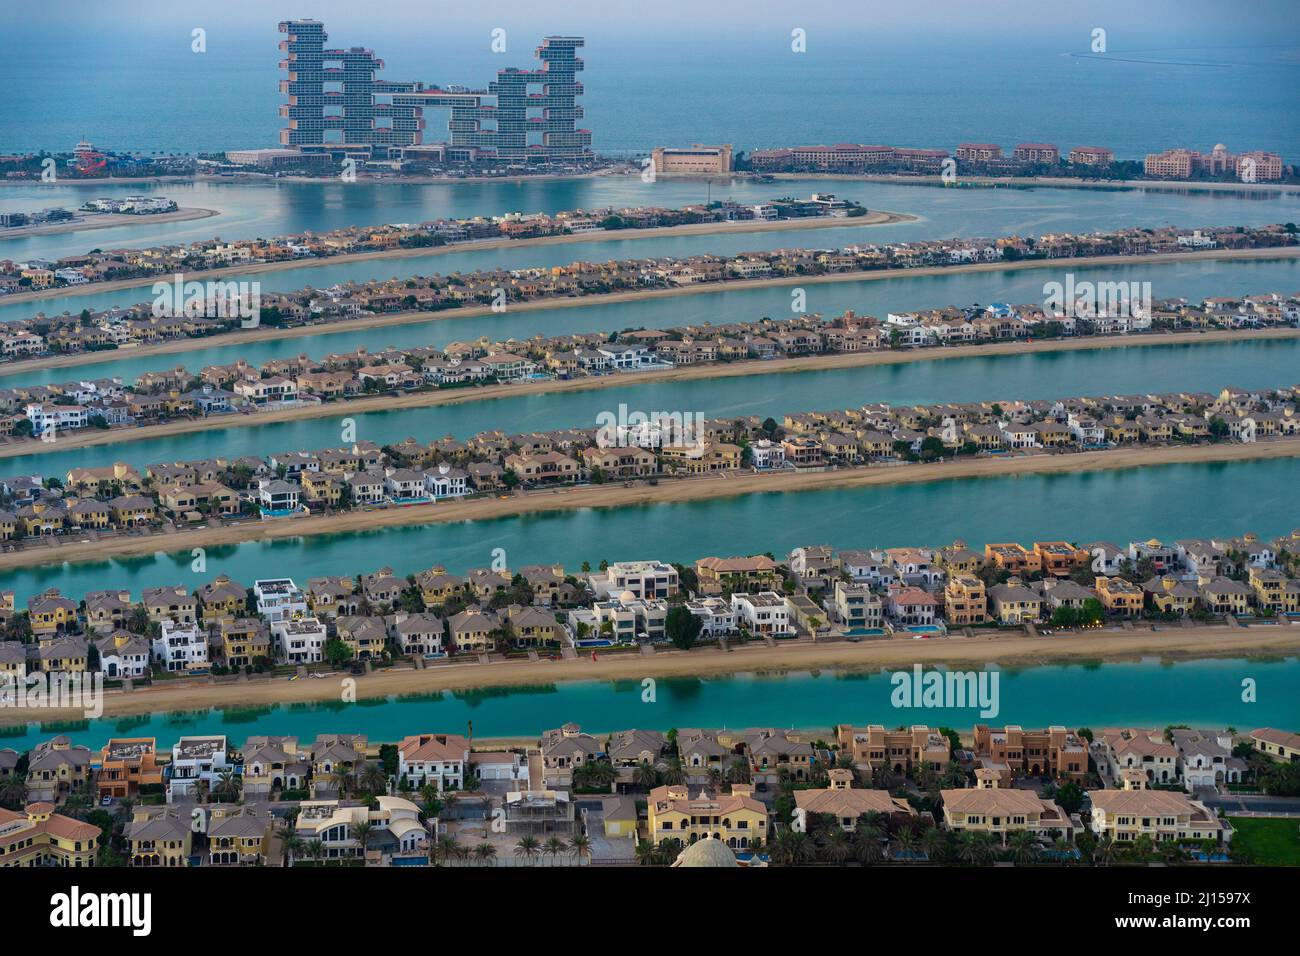 Dubai, UAE - Dec 05 2021: Aerial view of the houses of Palm Jumeirah with the unique Royal Atlantis Hotel in the background Stock Photo